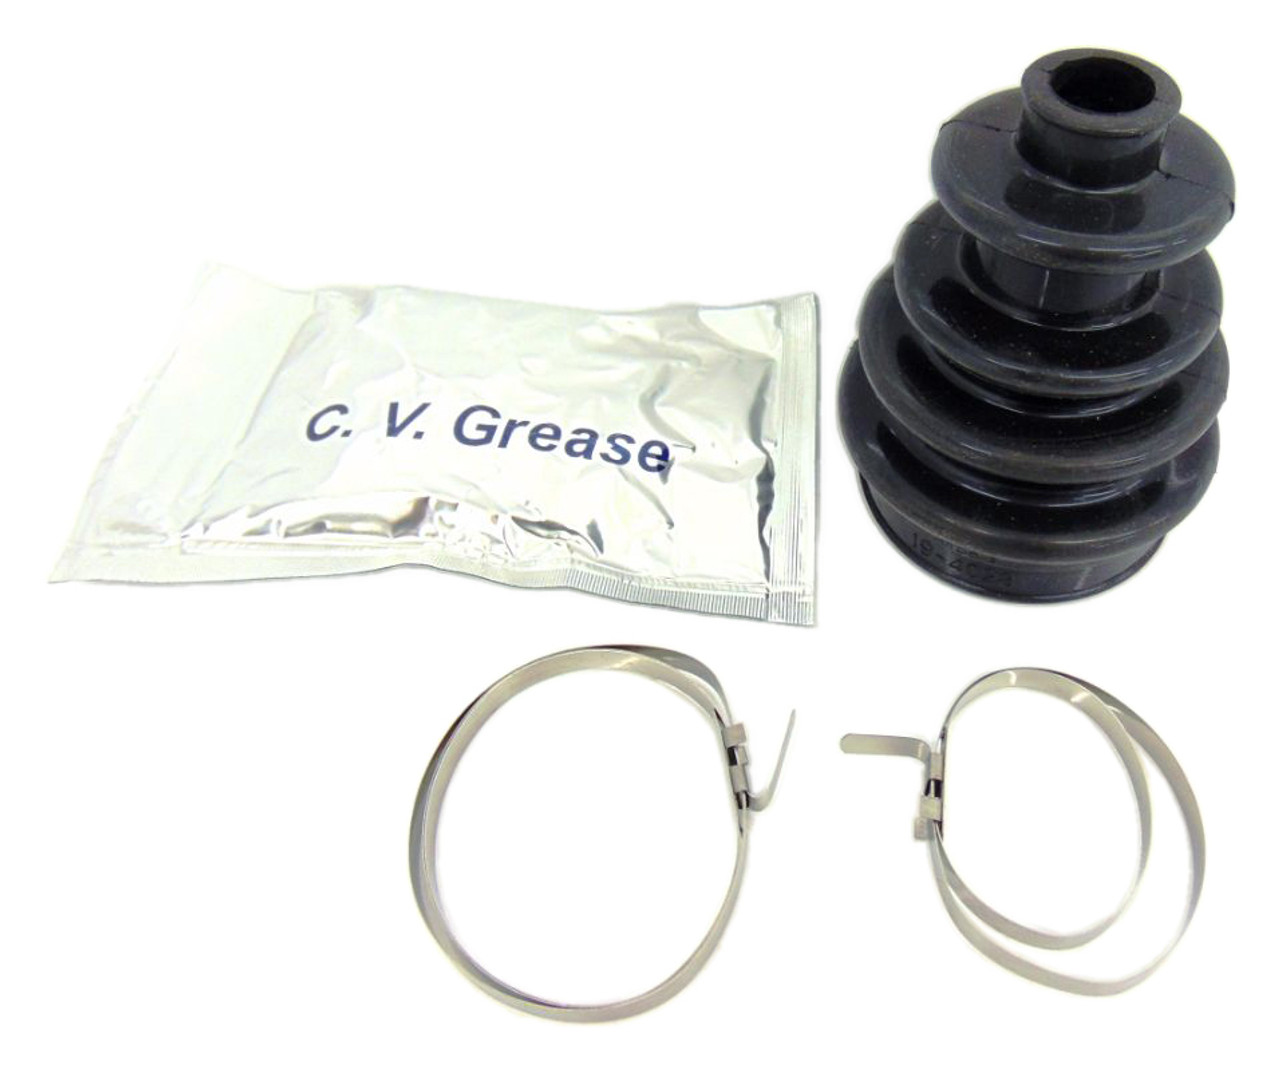 Complete Front Outer CV Boot Repair Kit for Honda TRX680 Rincon